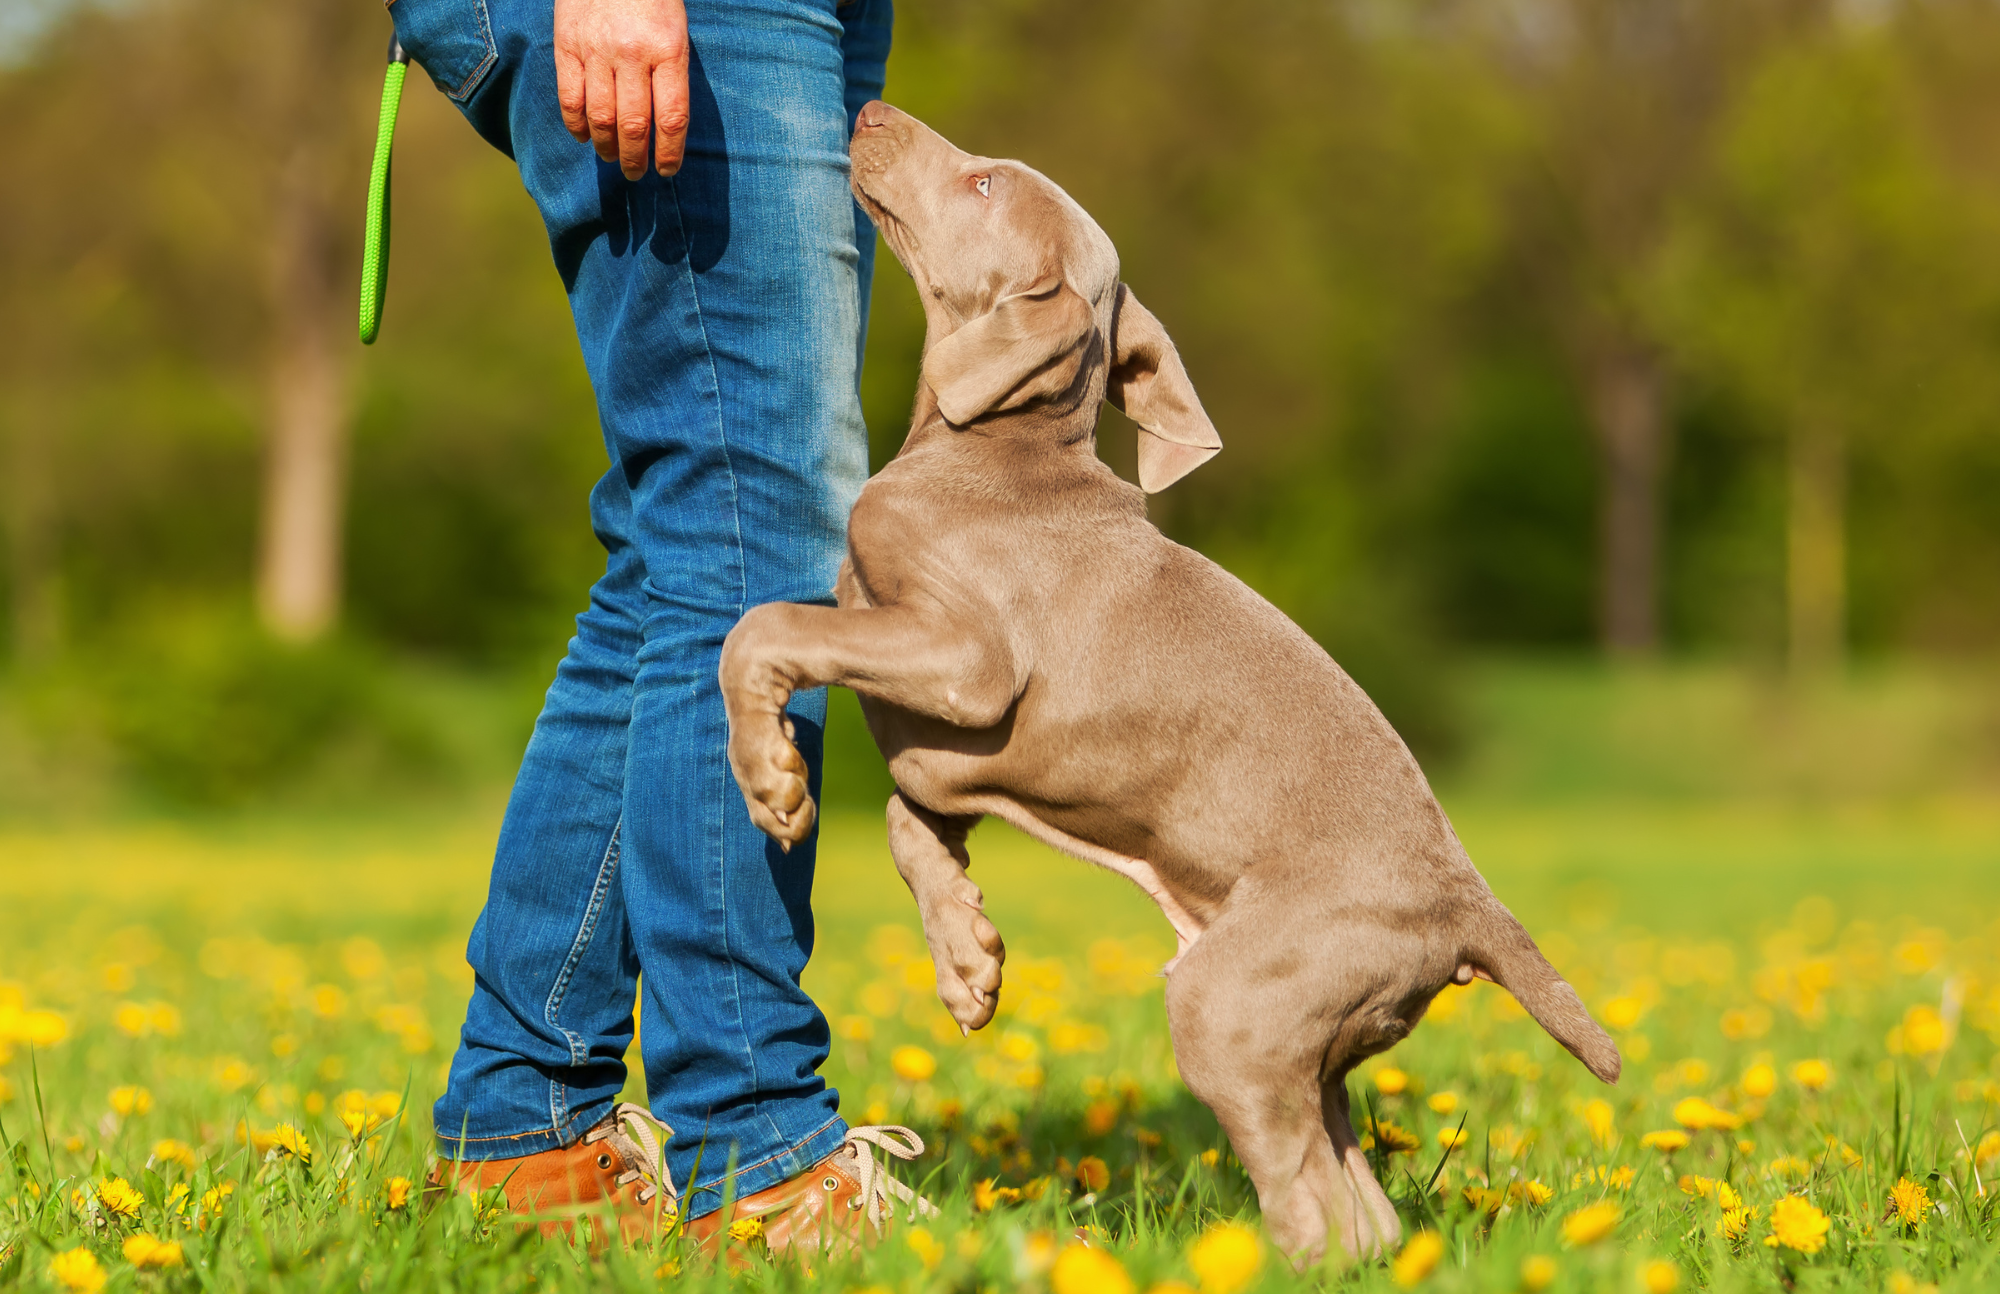 Tired of your puppy not listening? Why is my puppy so disobedient? - Puppy training tips for understanding and listening